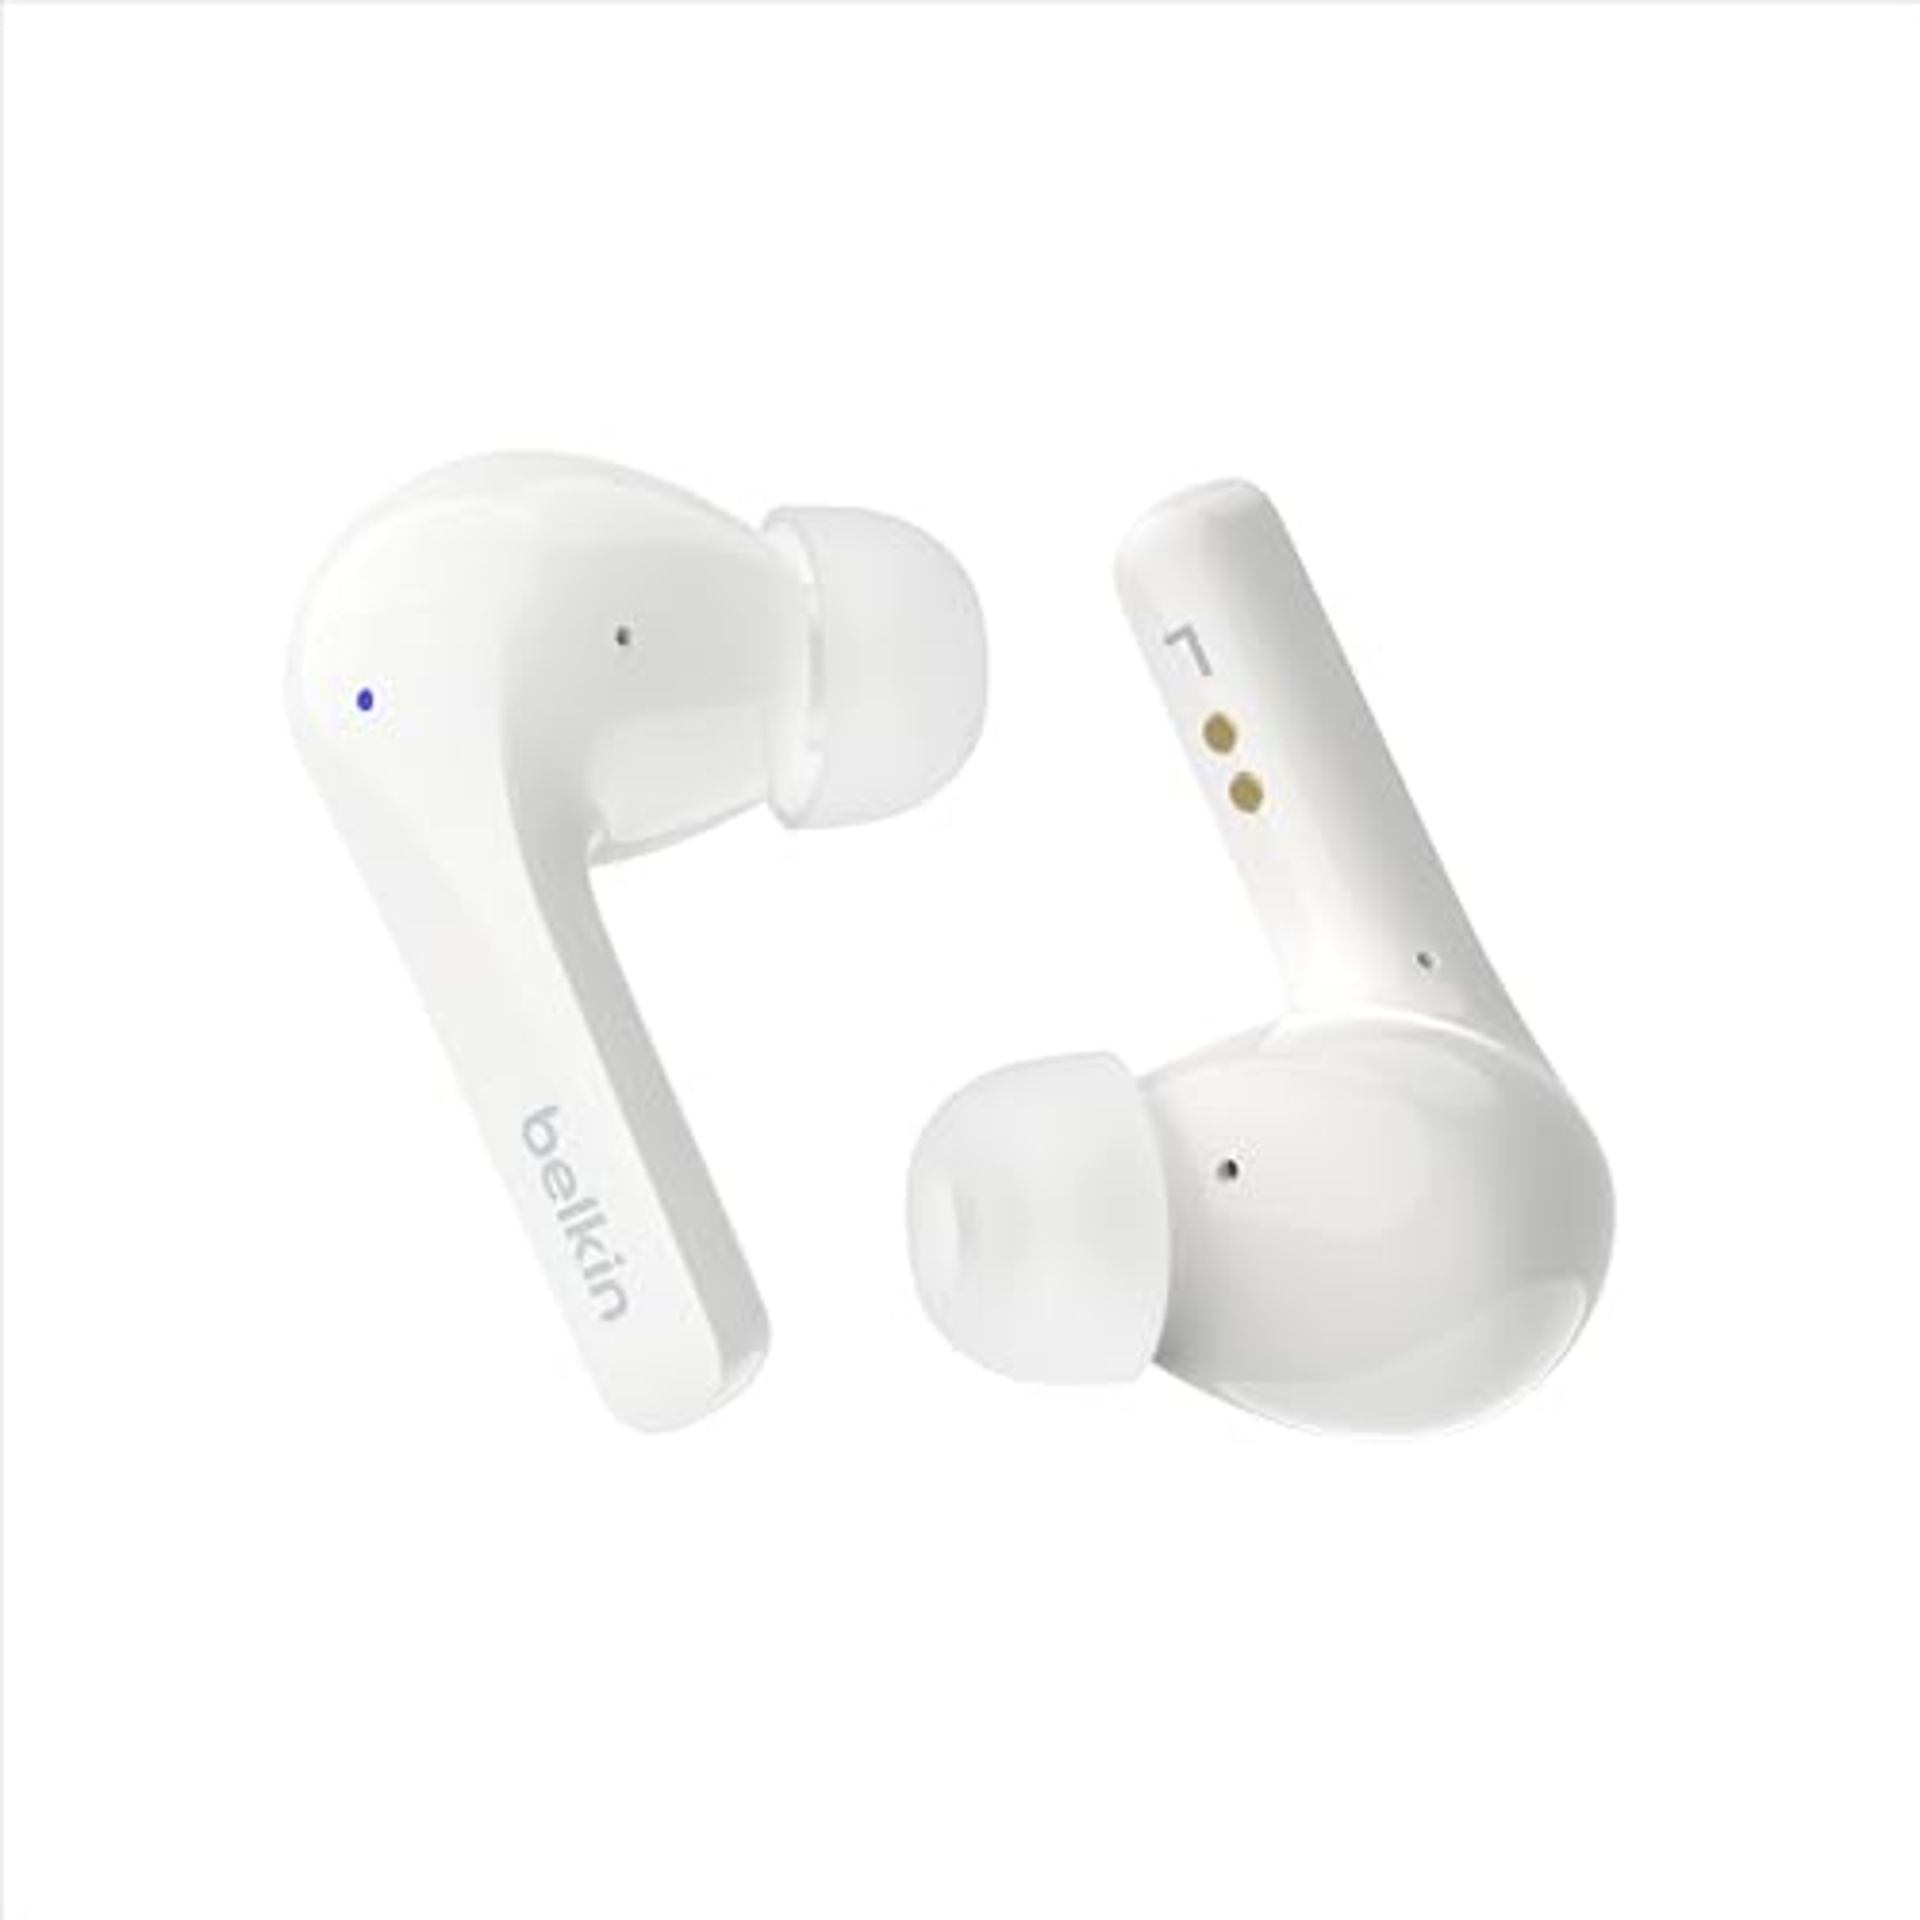 Belkin SoundForm"! Motion True Wireless Earbuds with noise cancellation, wireless cha - Image 4 of 6